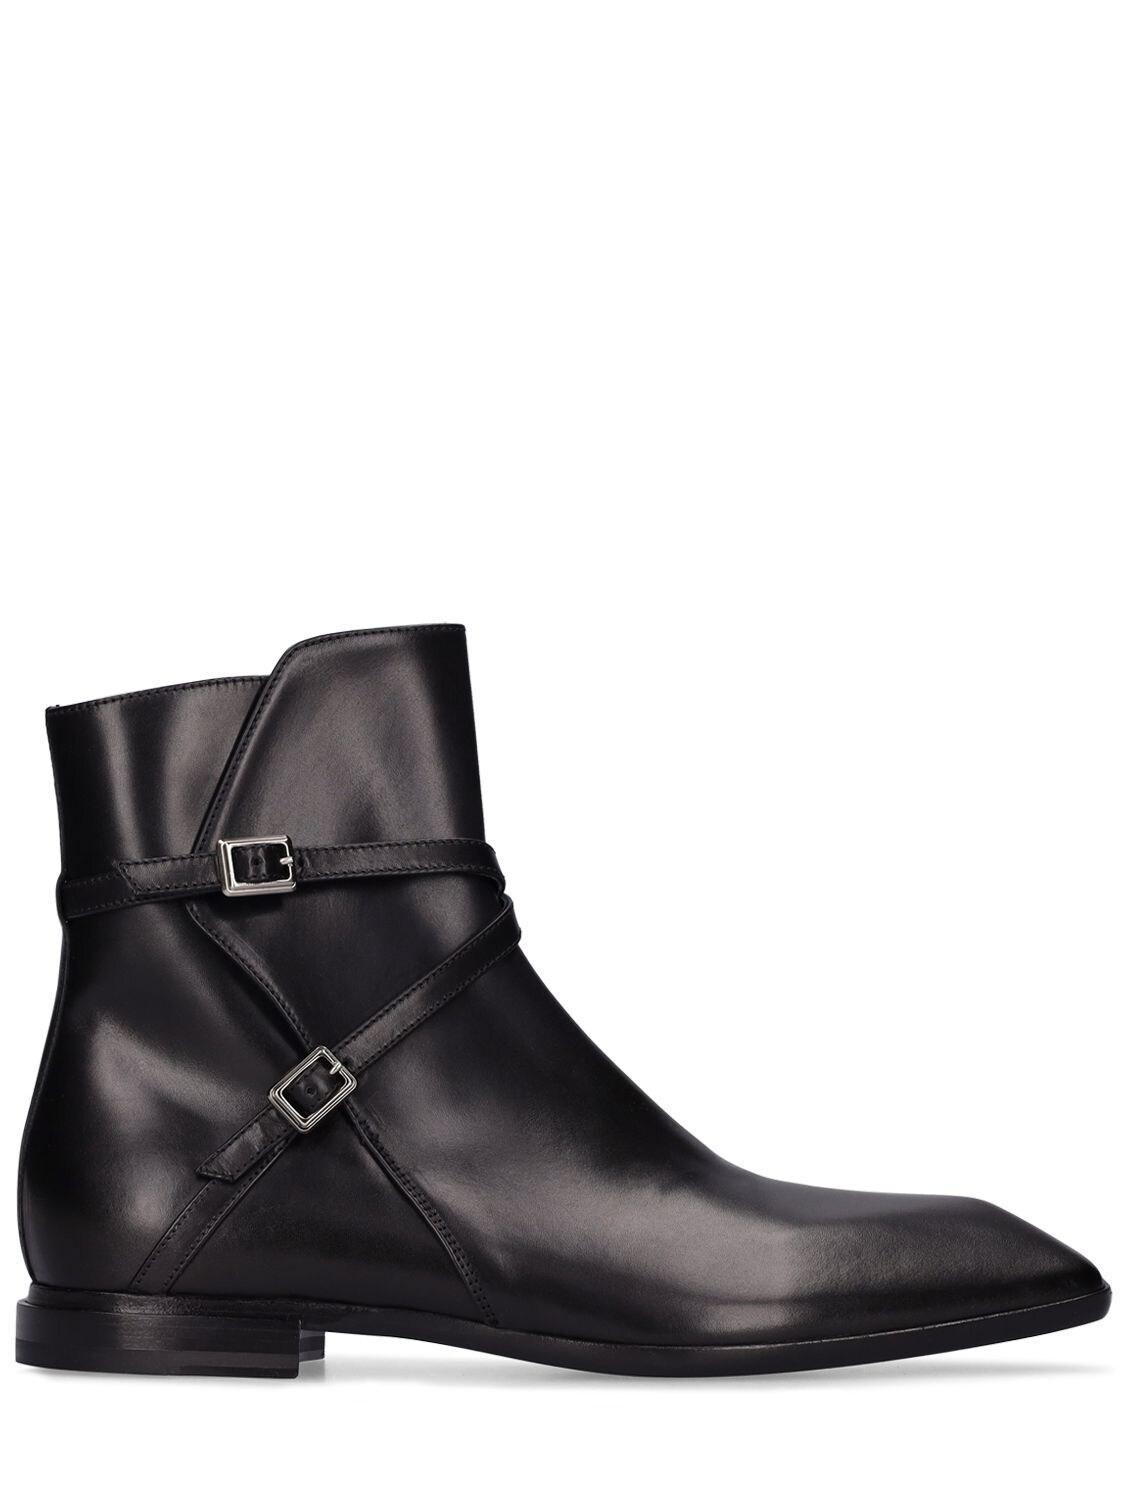 Cesare Paciotti Buckled Leather Ankle Boots in Black for Men | Lyst